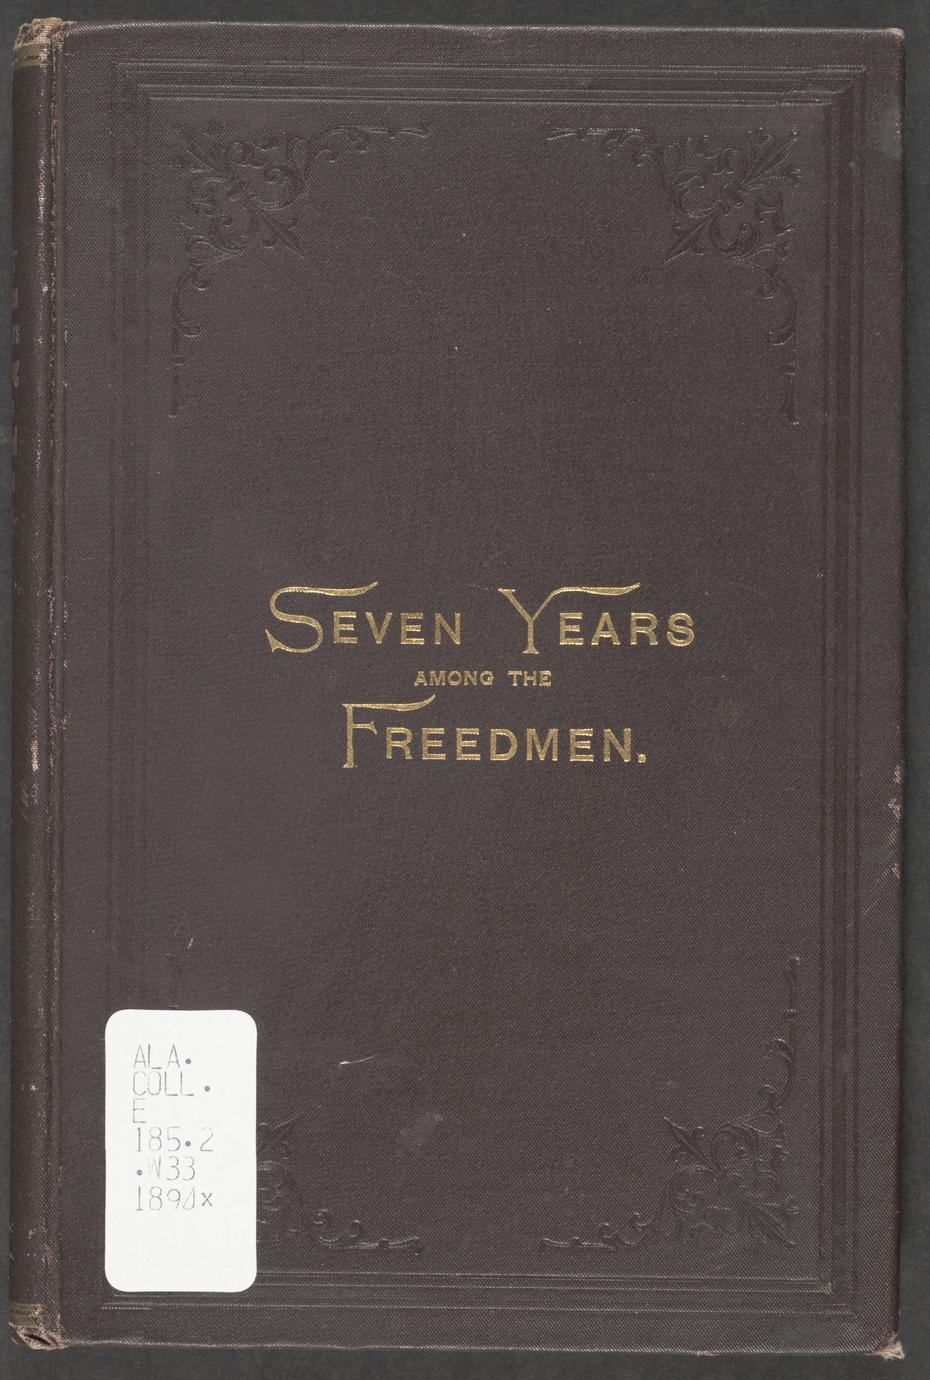 Seven years among the freedmen (1 of 2)